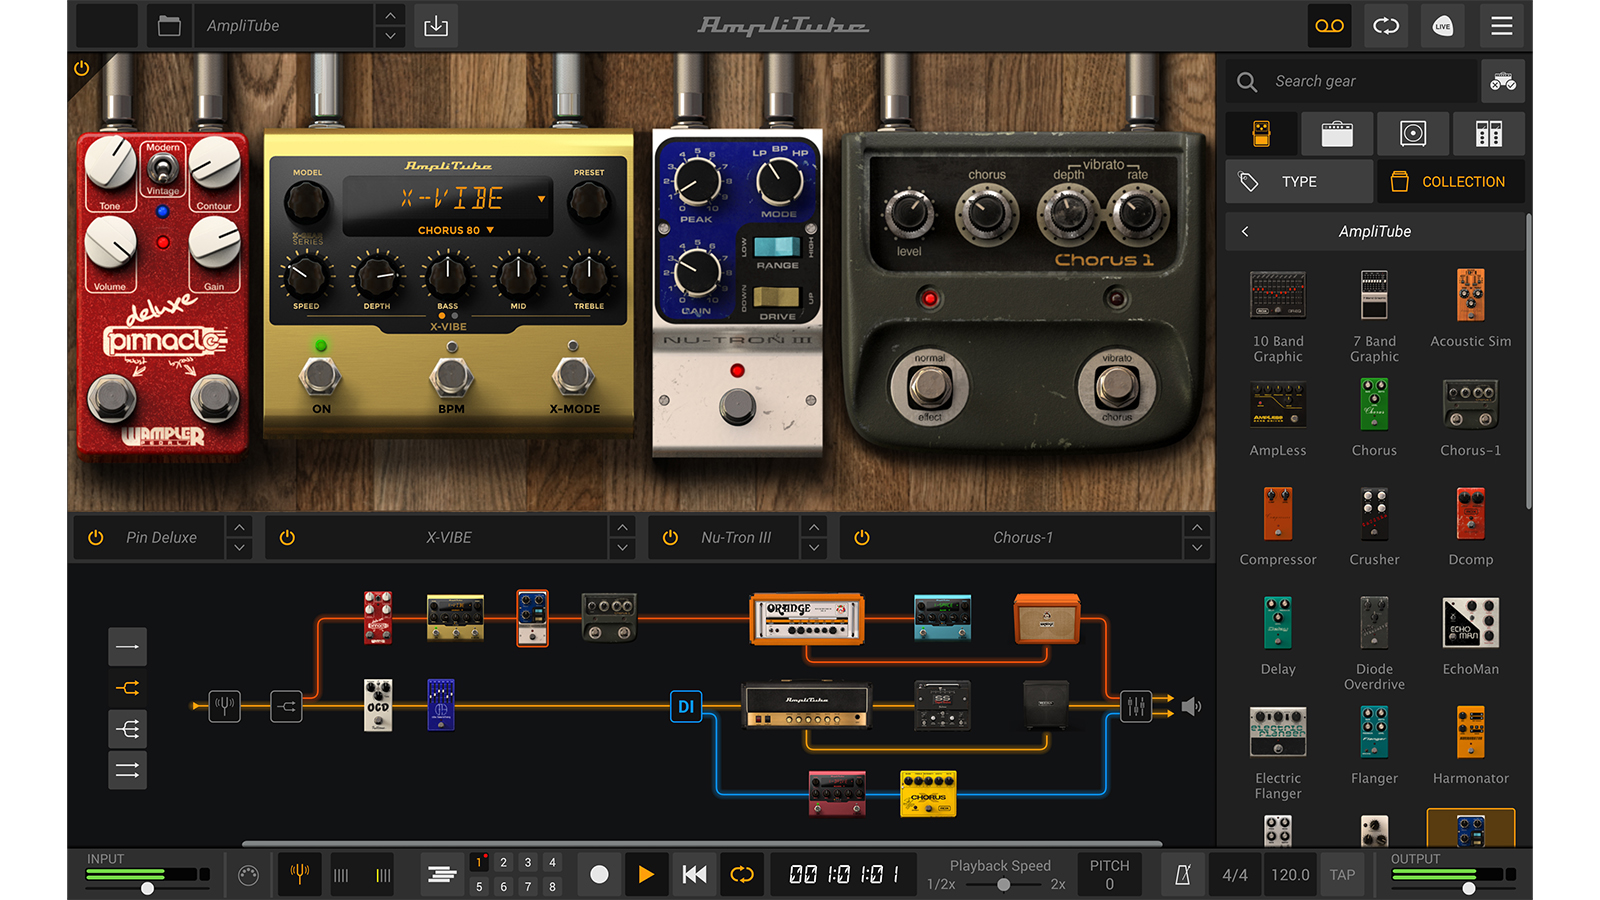 download the last version for ipod Guitar Rig 7 Pro 7.0.1